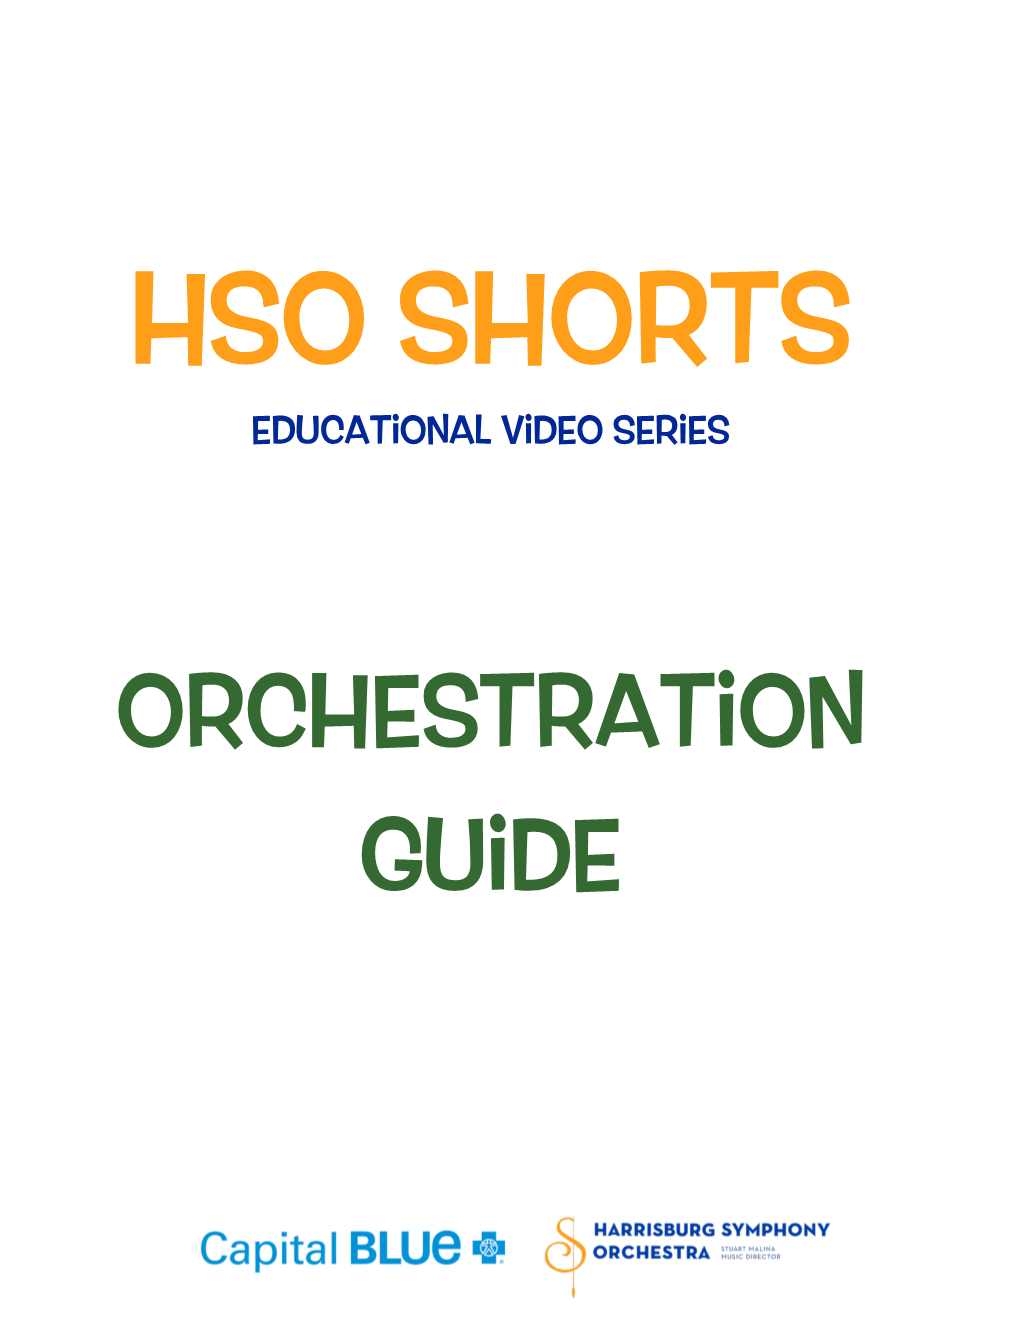 HSO Shorts: Orchestration Guide